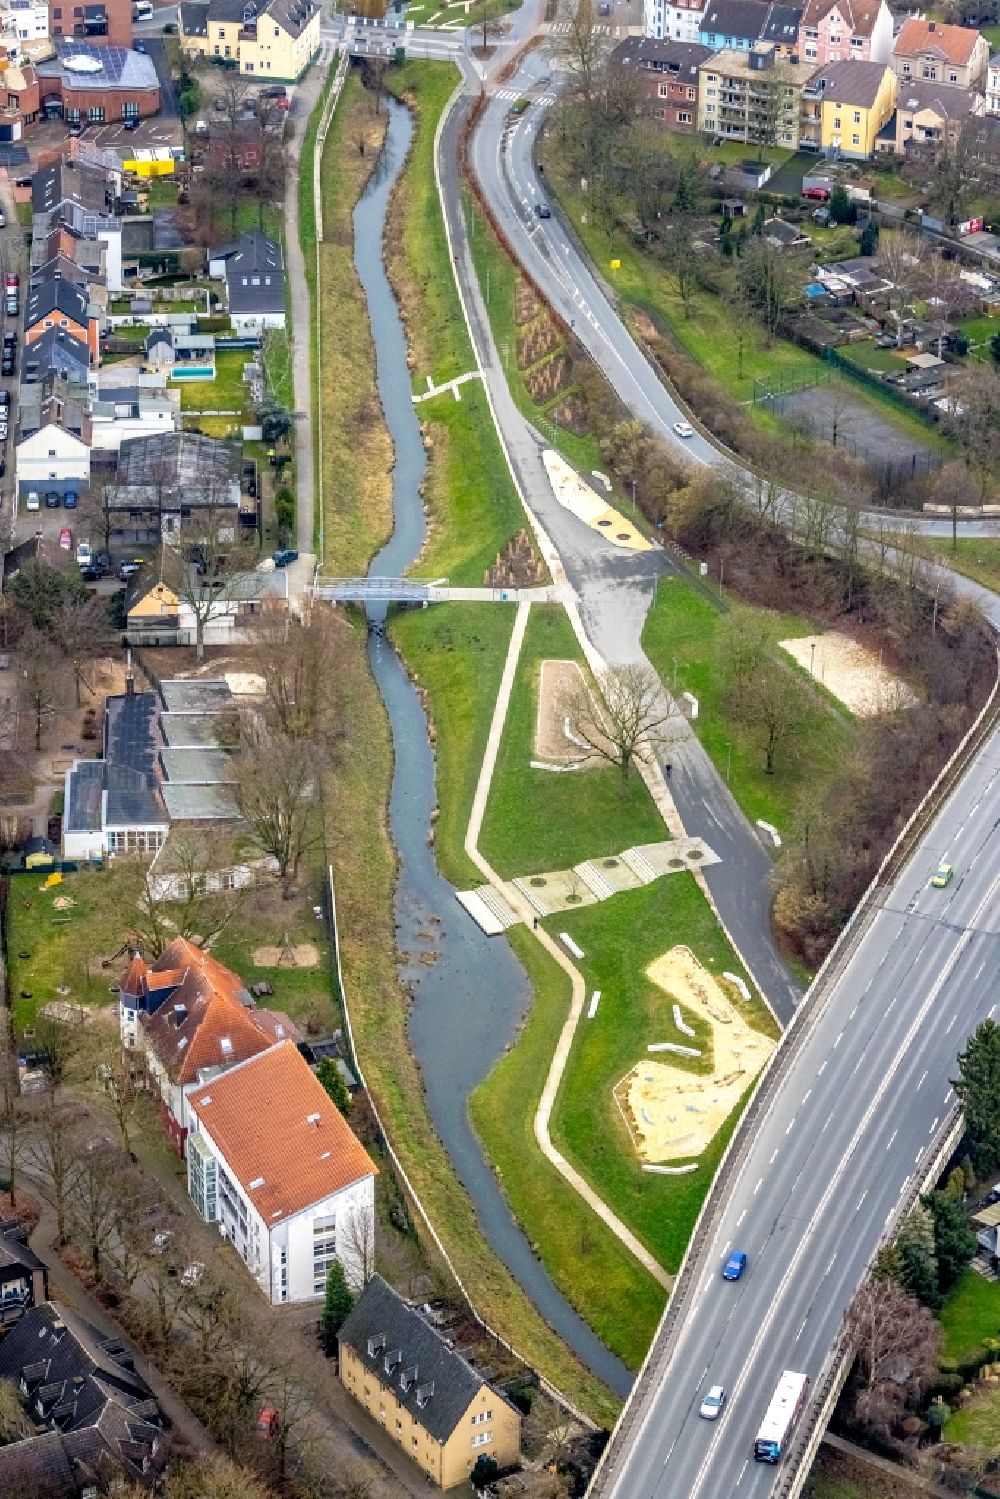 Kamen from the bird's eye view: park of Seseke-Park along the B233 in Kamen in the state North Rhine-Westphalia, Germany